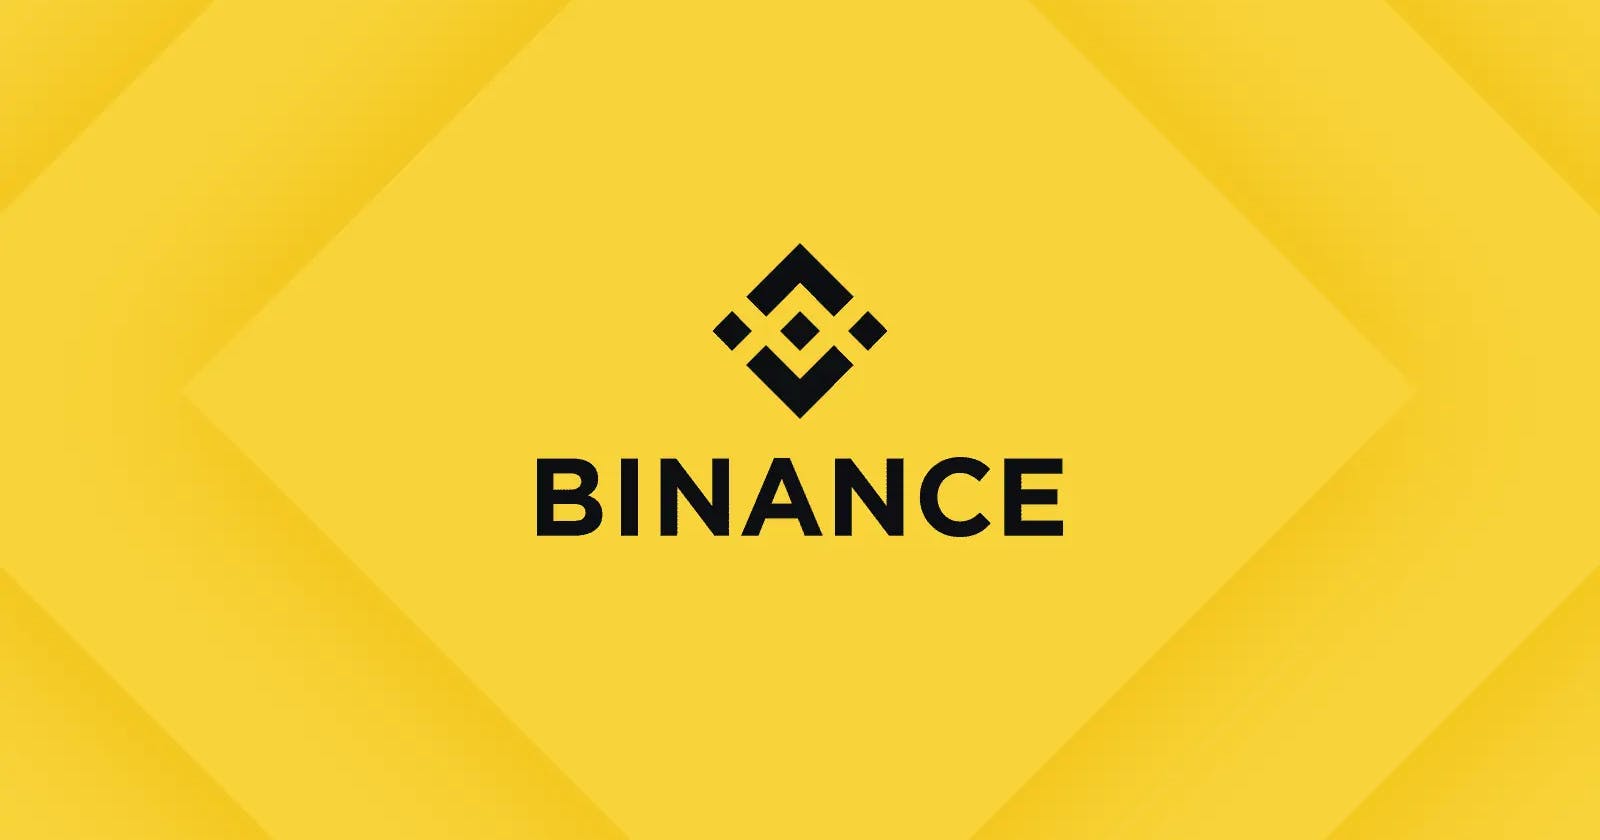 Getting Started with Binance: A Beginner's Guide to Using the Cryptocurrency Trading App